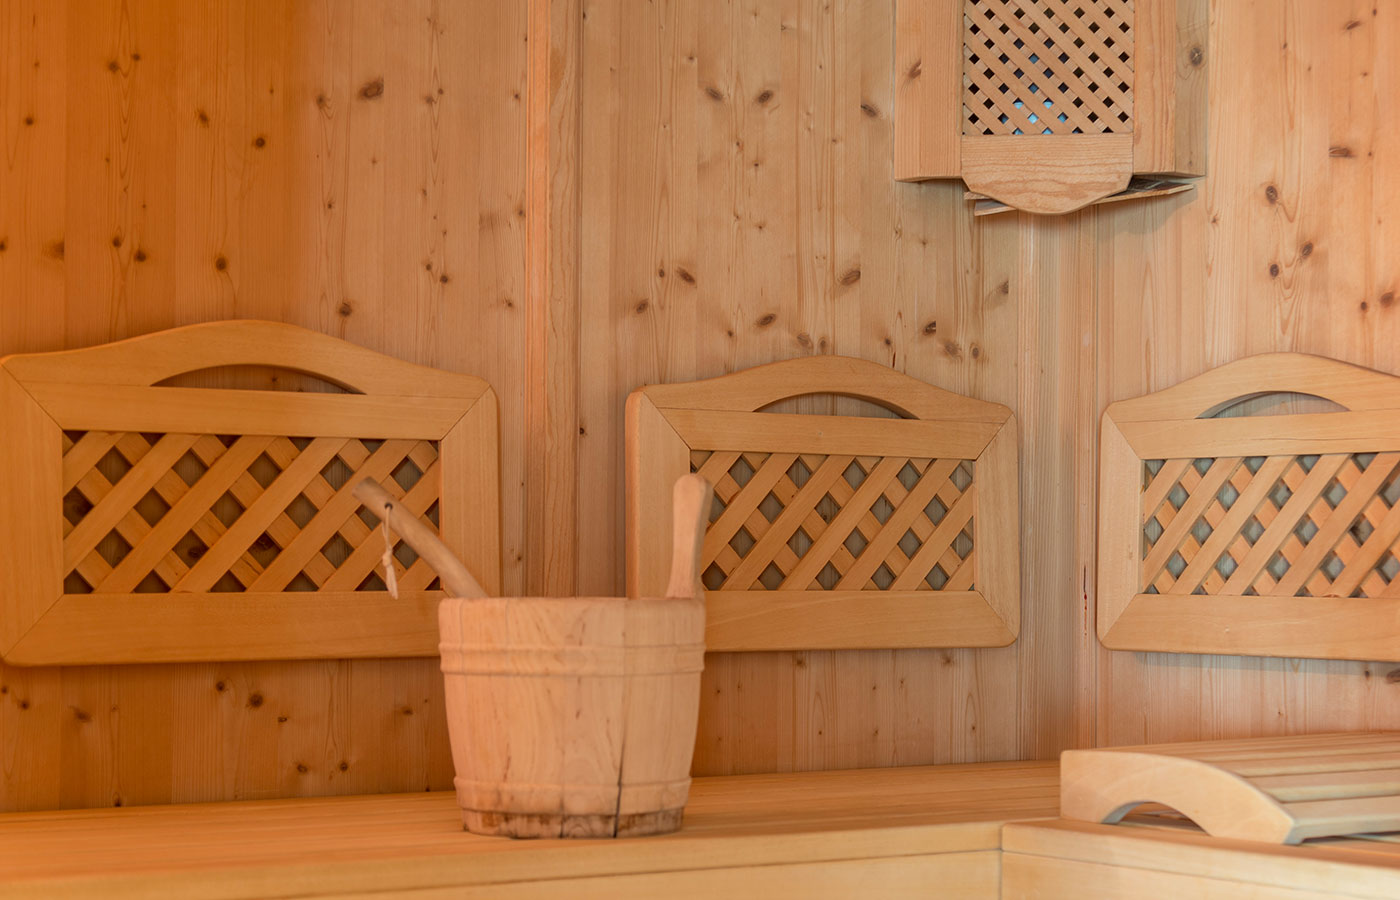 Sitting and walls in natural wood inside the sauna of Hotel Waldheim in South Tyrol